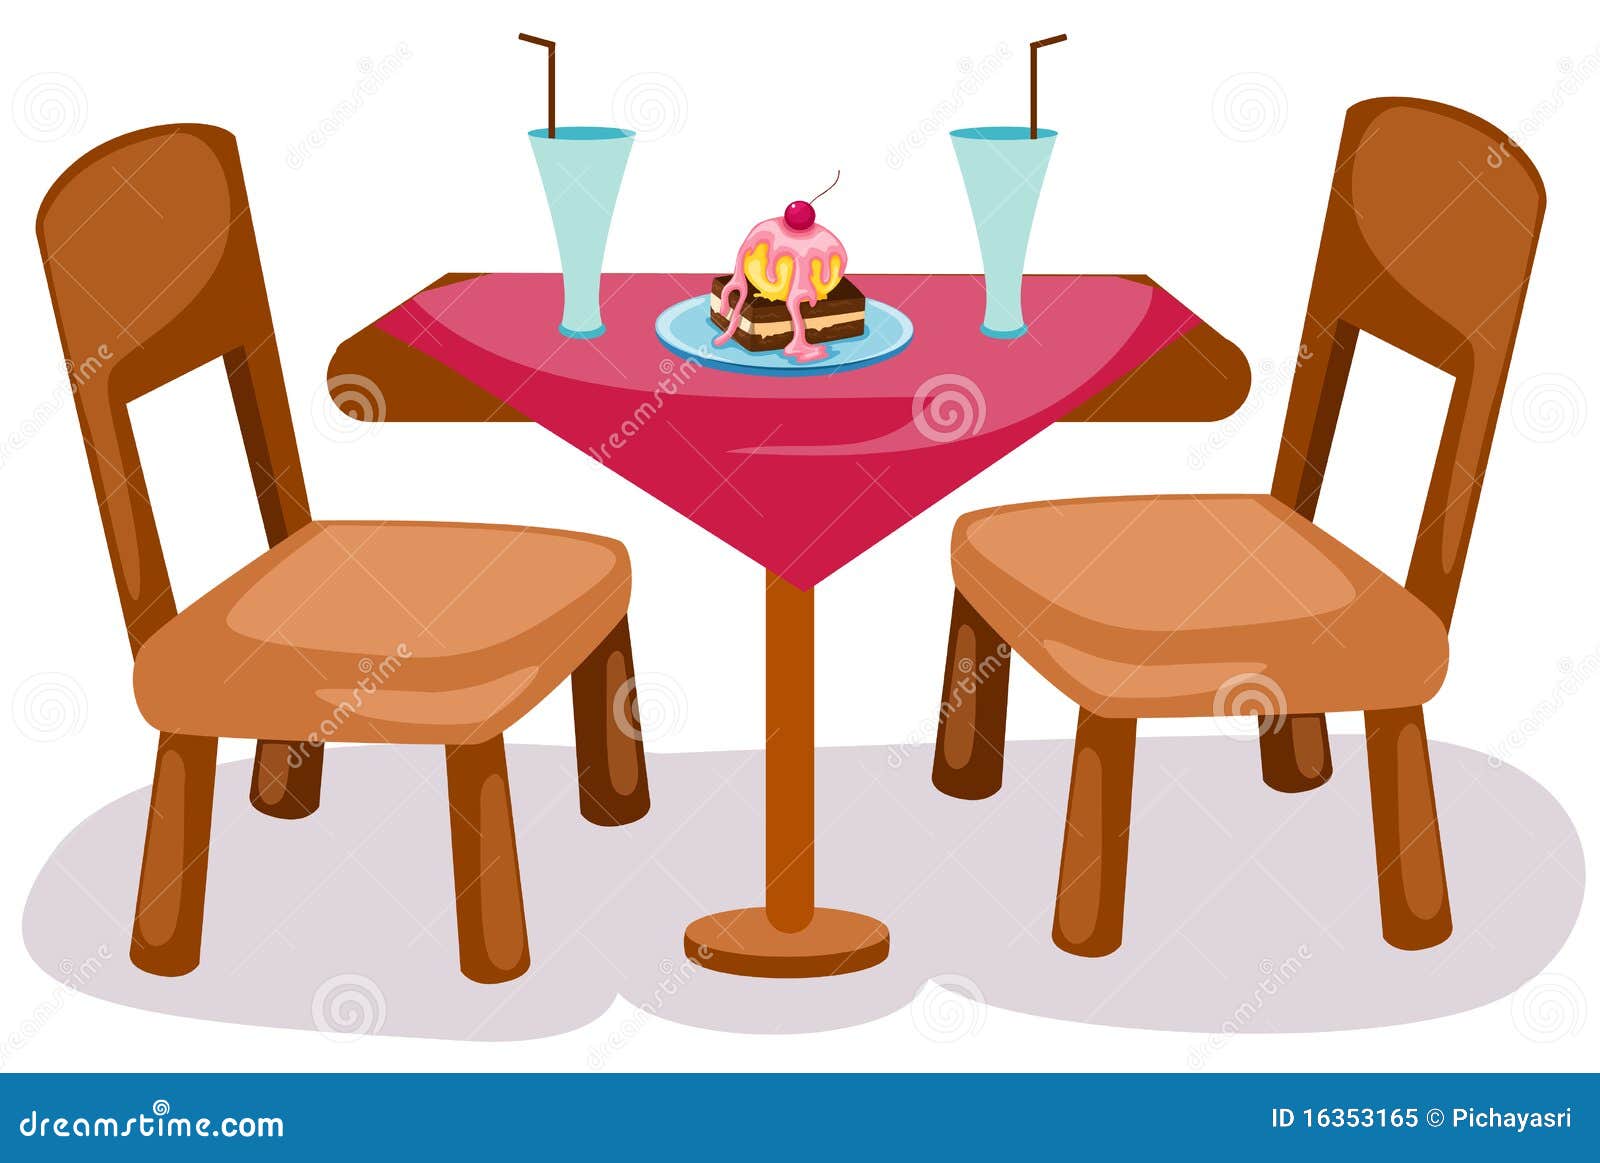 Table and Chairs Royalty Free Stock Photo